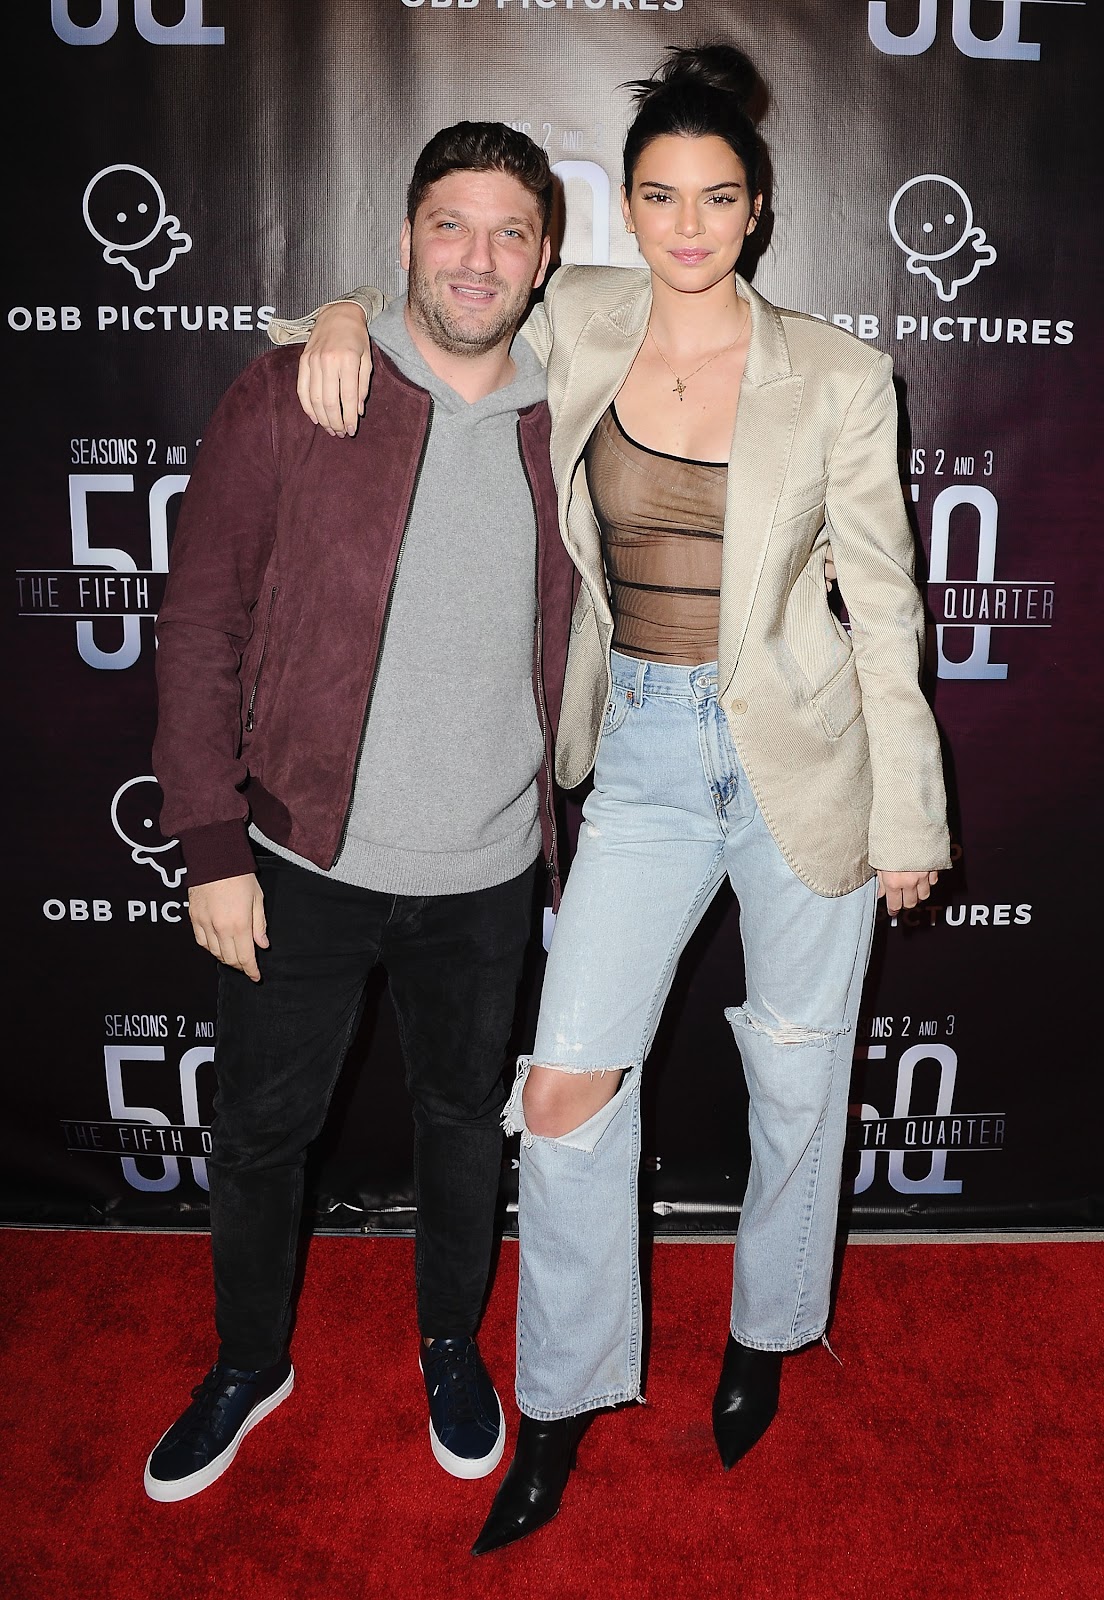 Kendall Jenner See Through at the Premiere of The 5th Quarter!